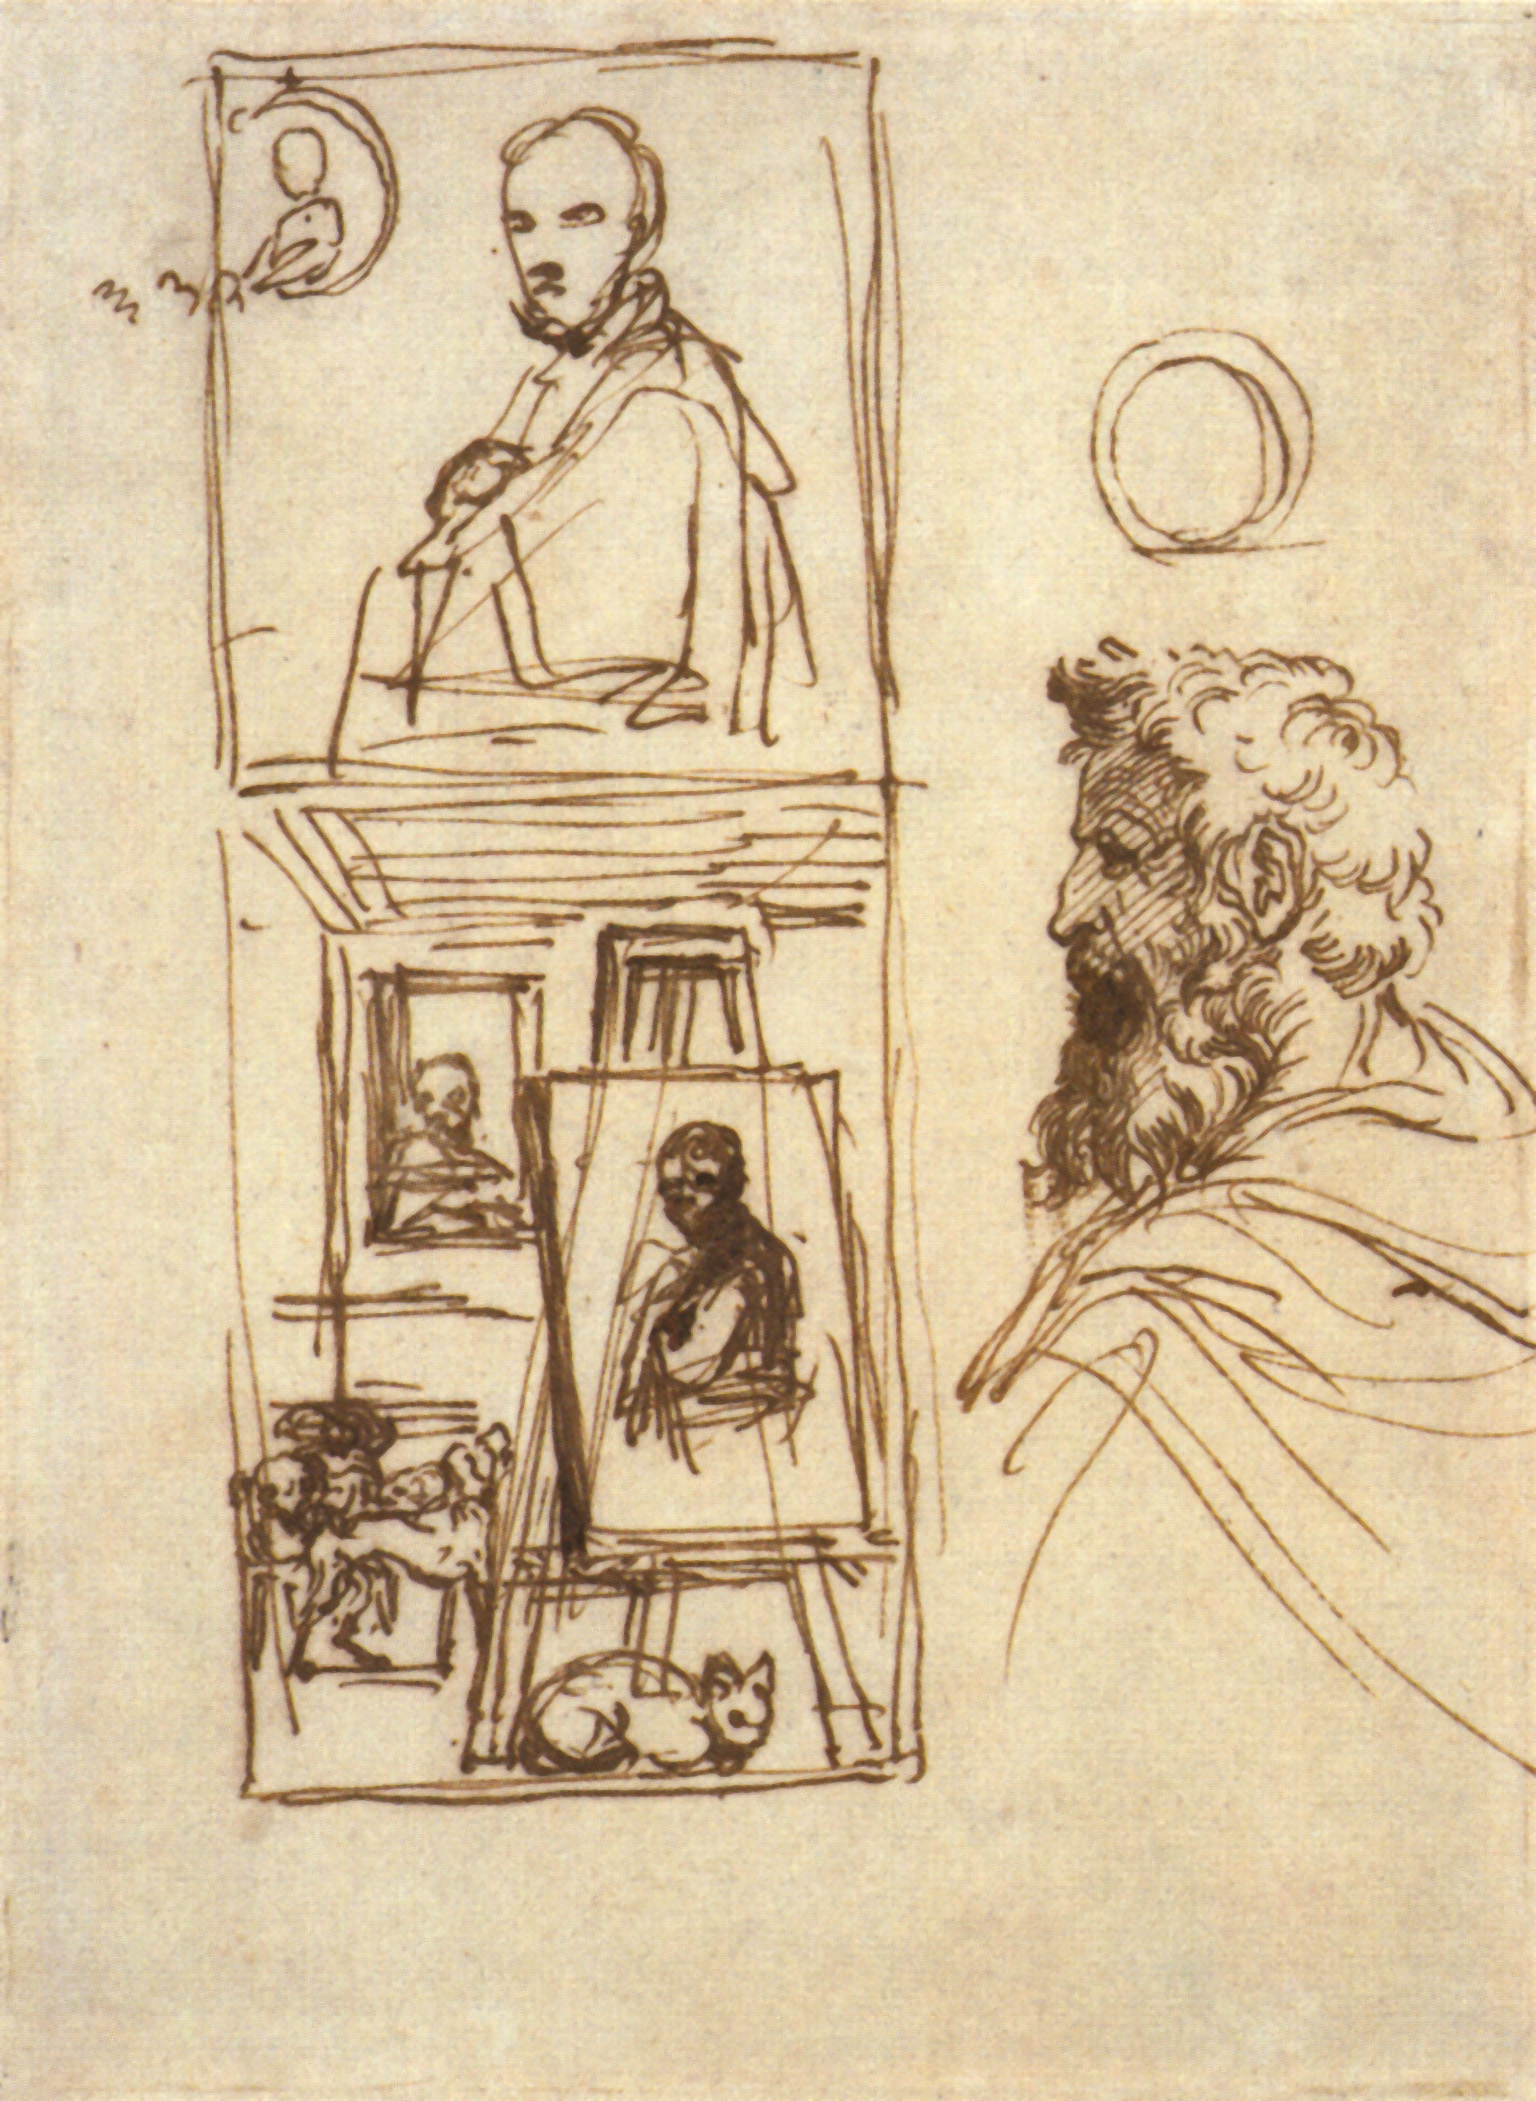 Preparatory drawing for Selfportrait on an Easel in a